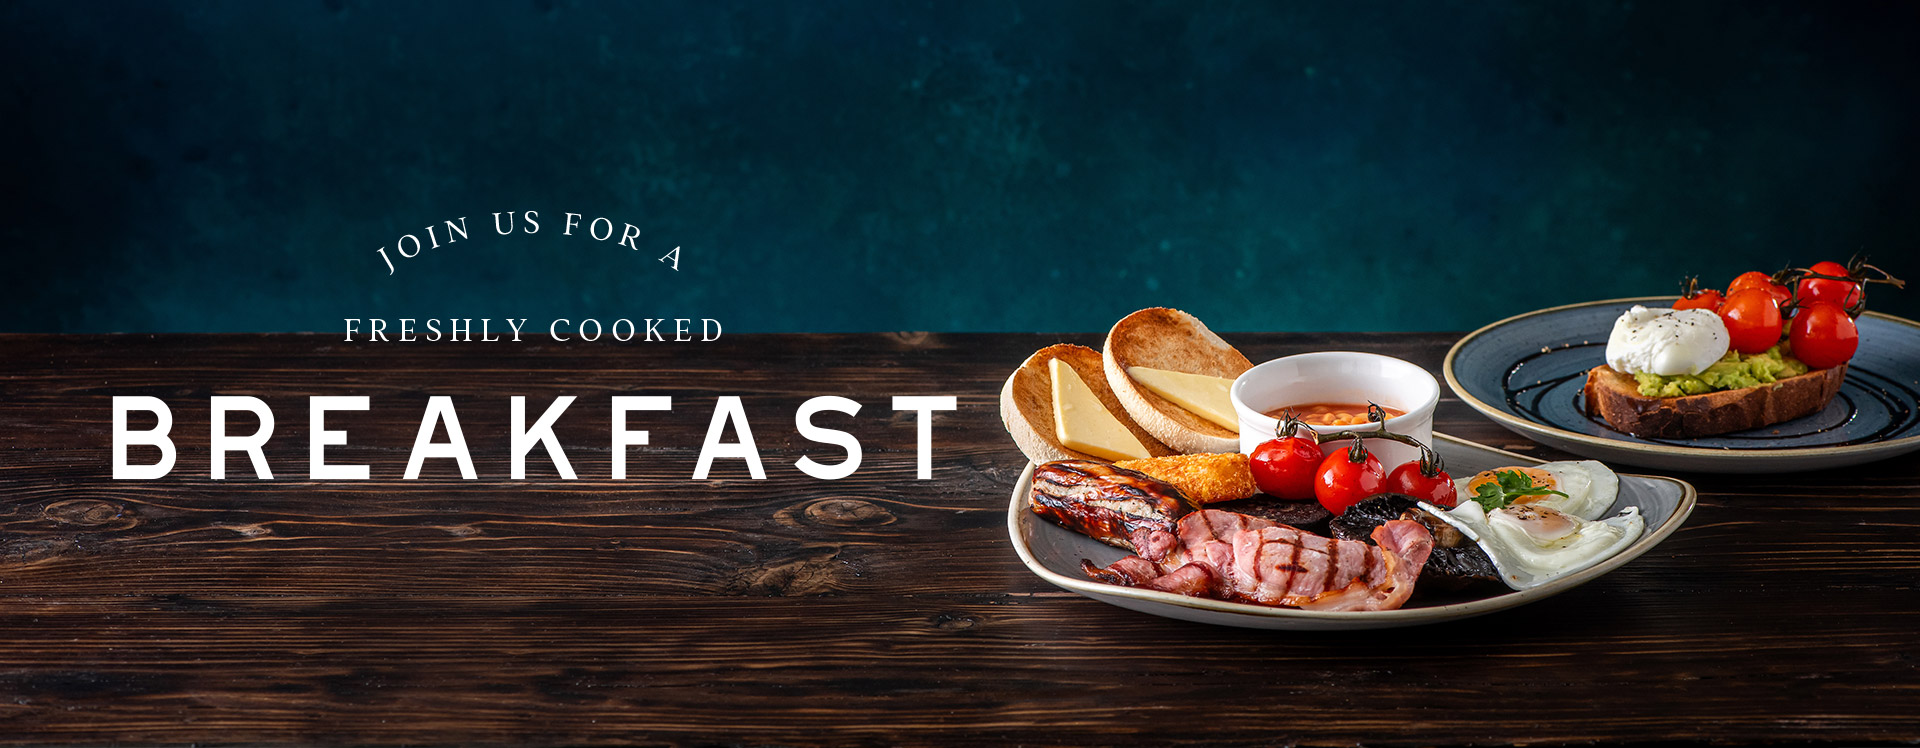 Breakfast at The Blackfriar - Book a table